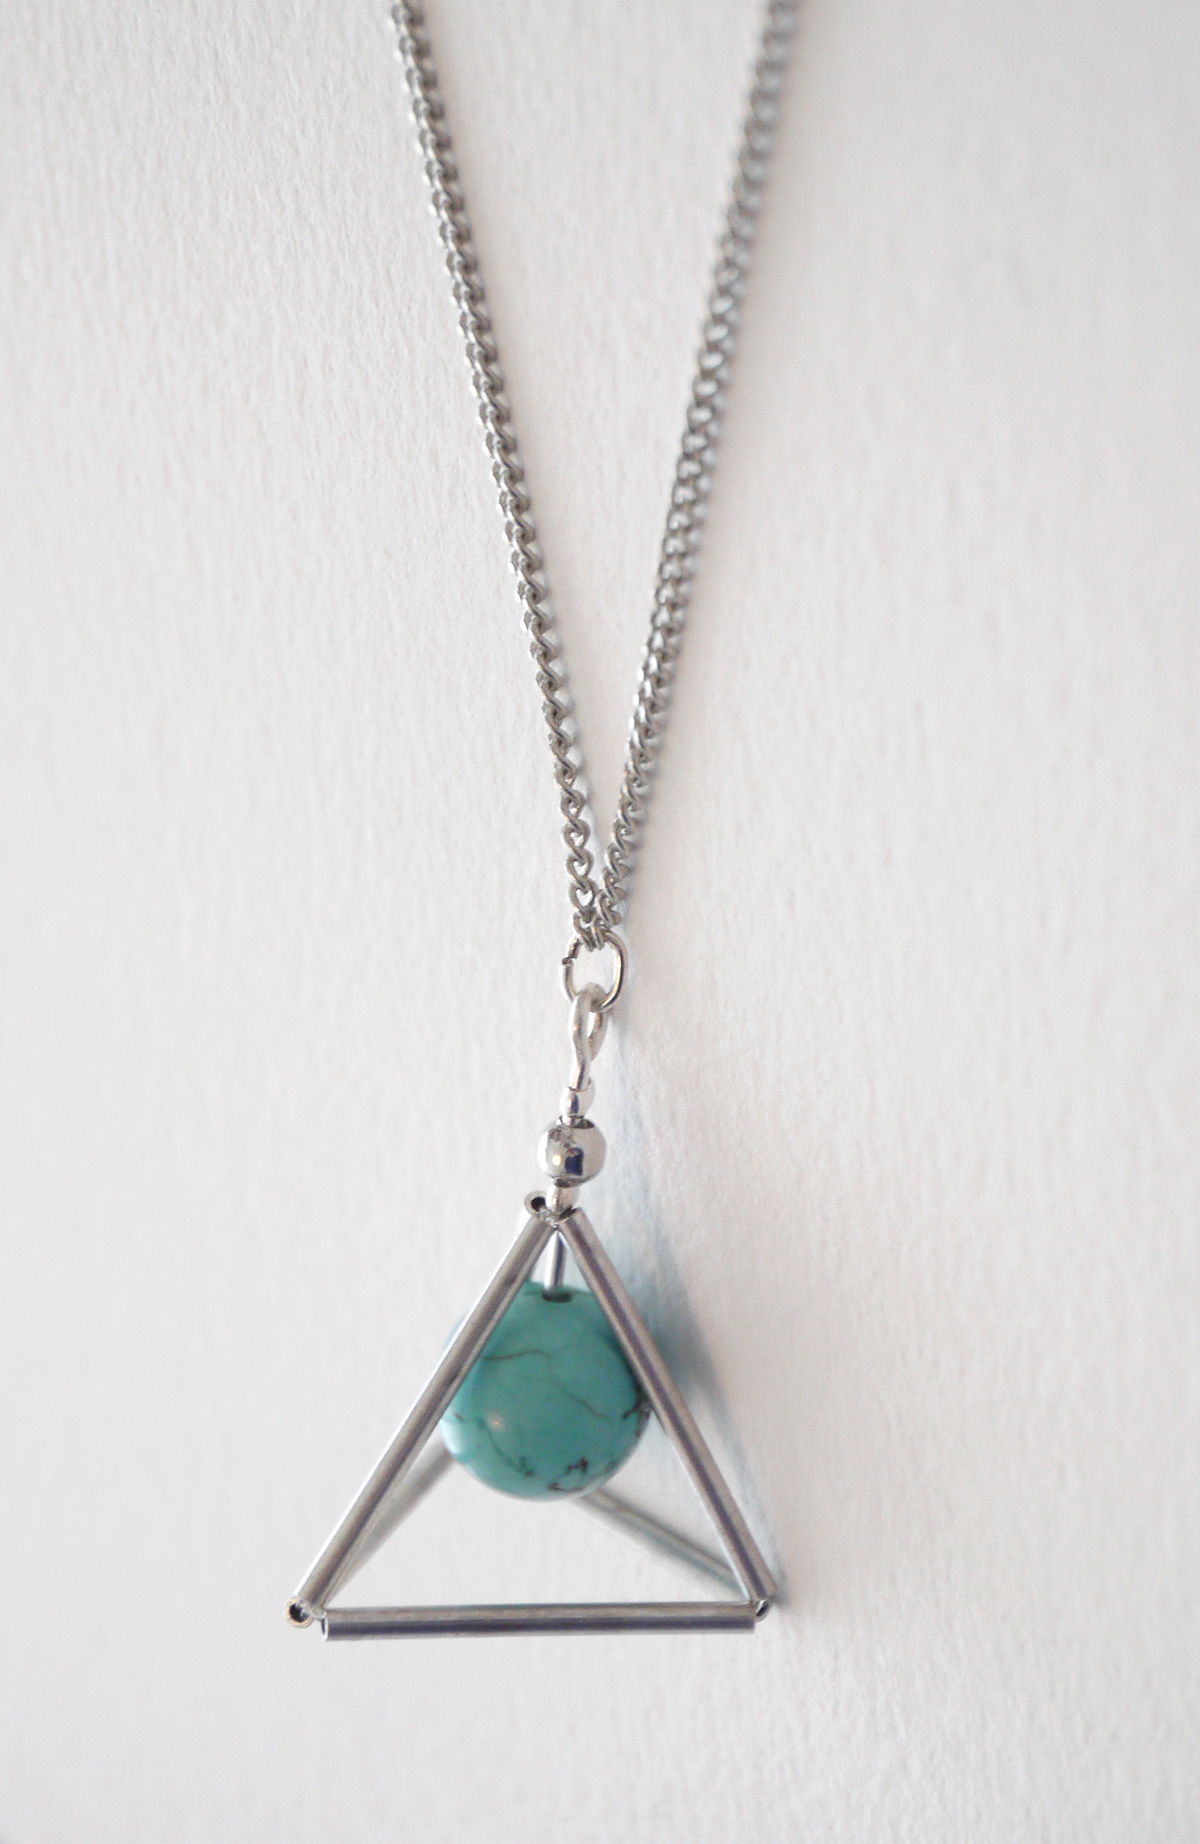 HANDMADE WITH LOVE Marion Pierret Jewellery pyramid Necklace stone etsy